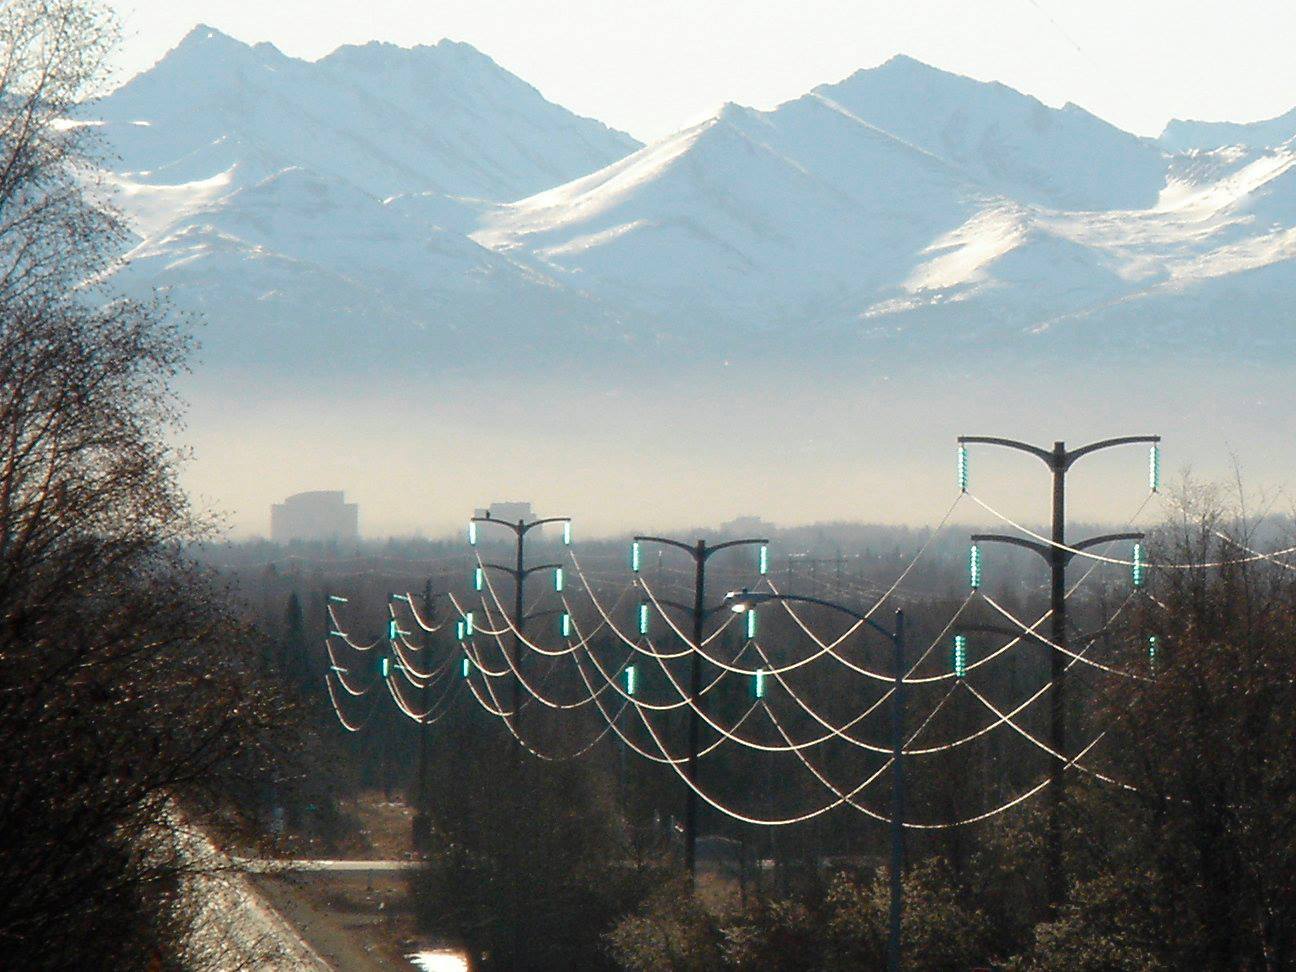 Power transmission lines on poles in the foreground, with mountains in the distance.